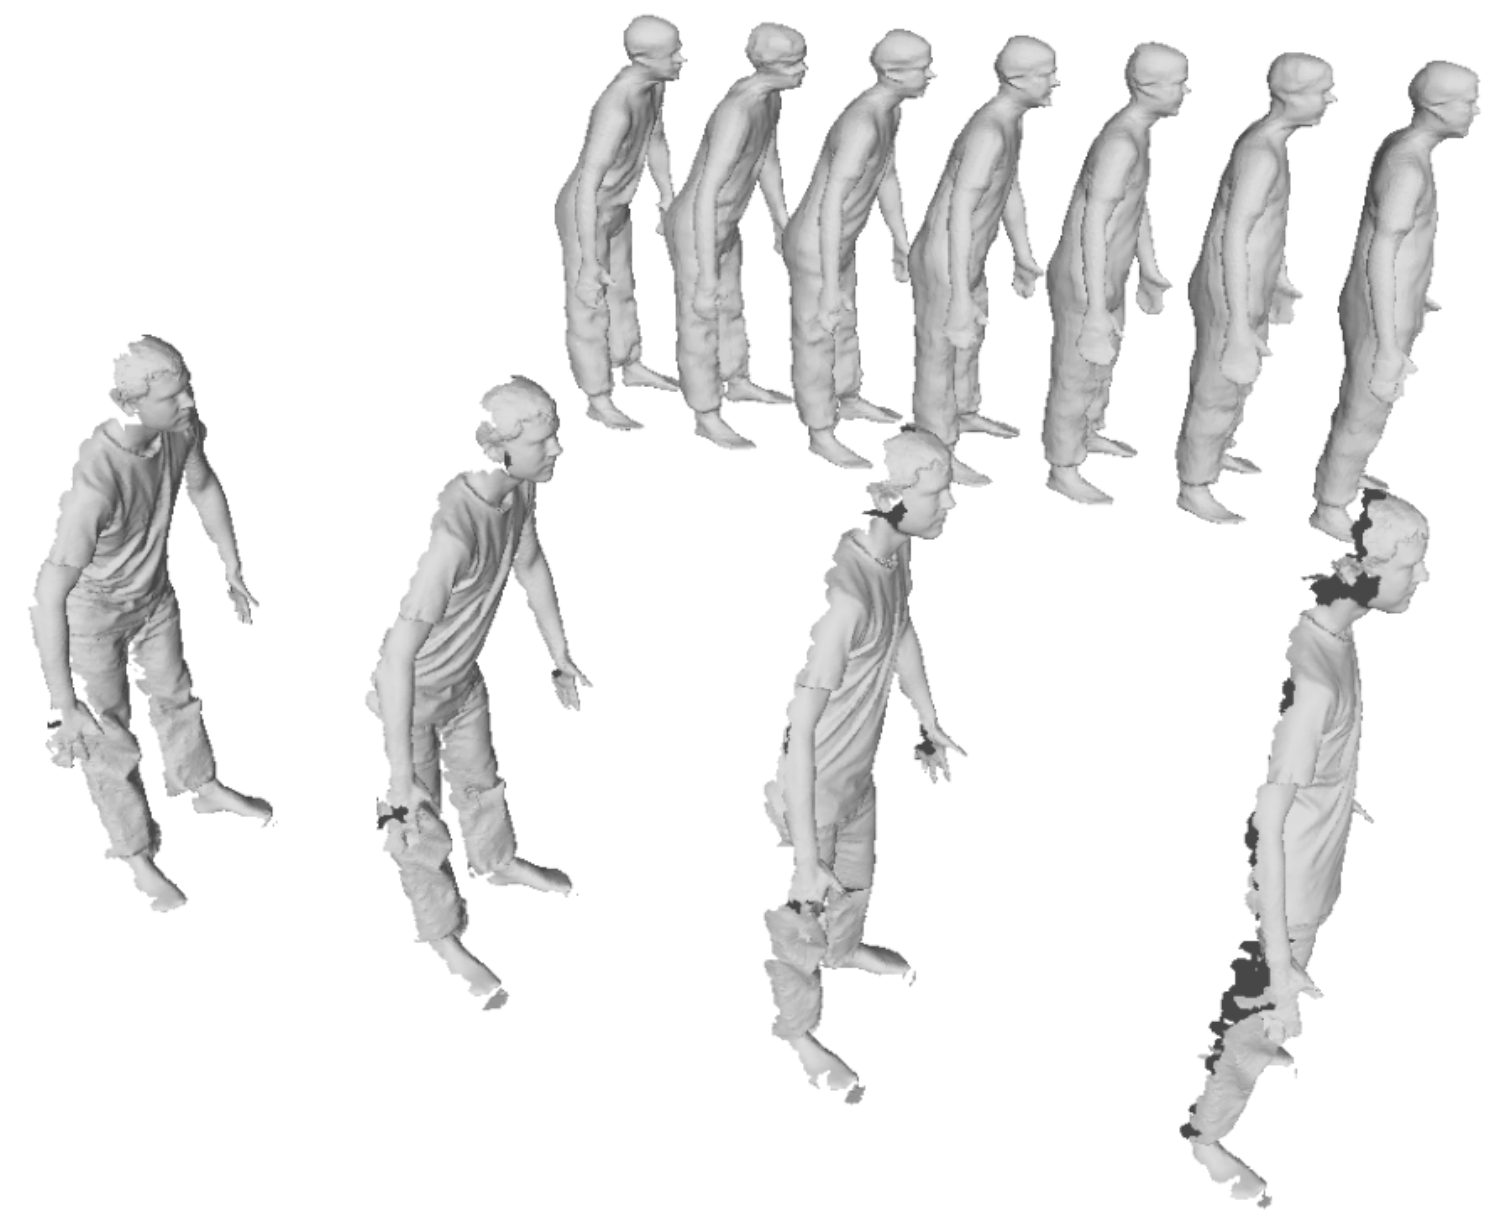 Teaser figure showing reconstructed movement completion for an example human